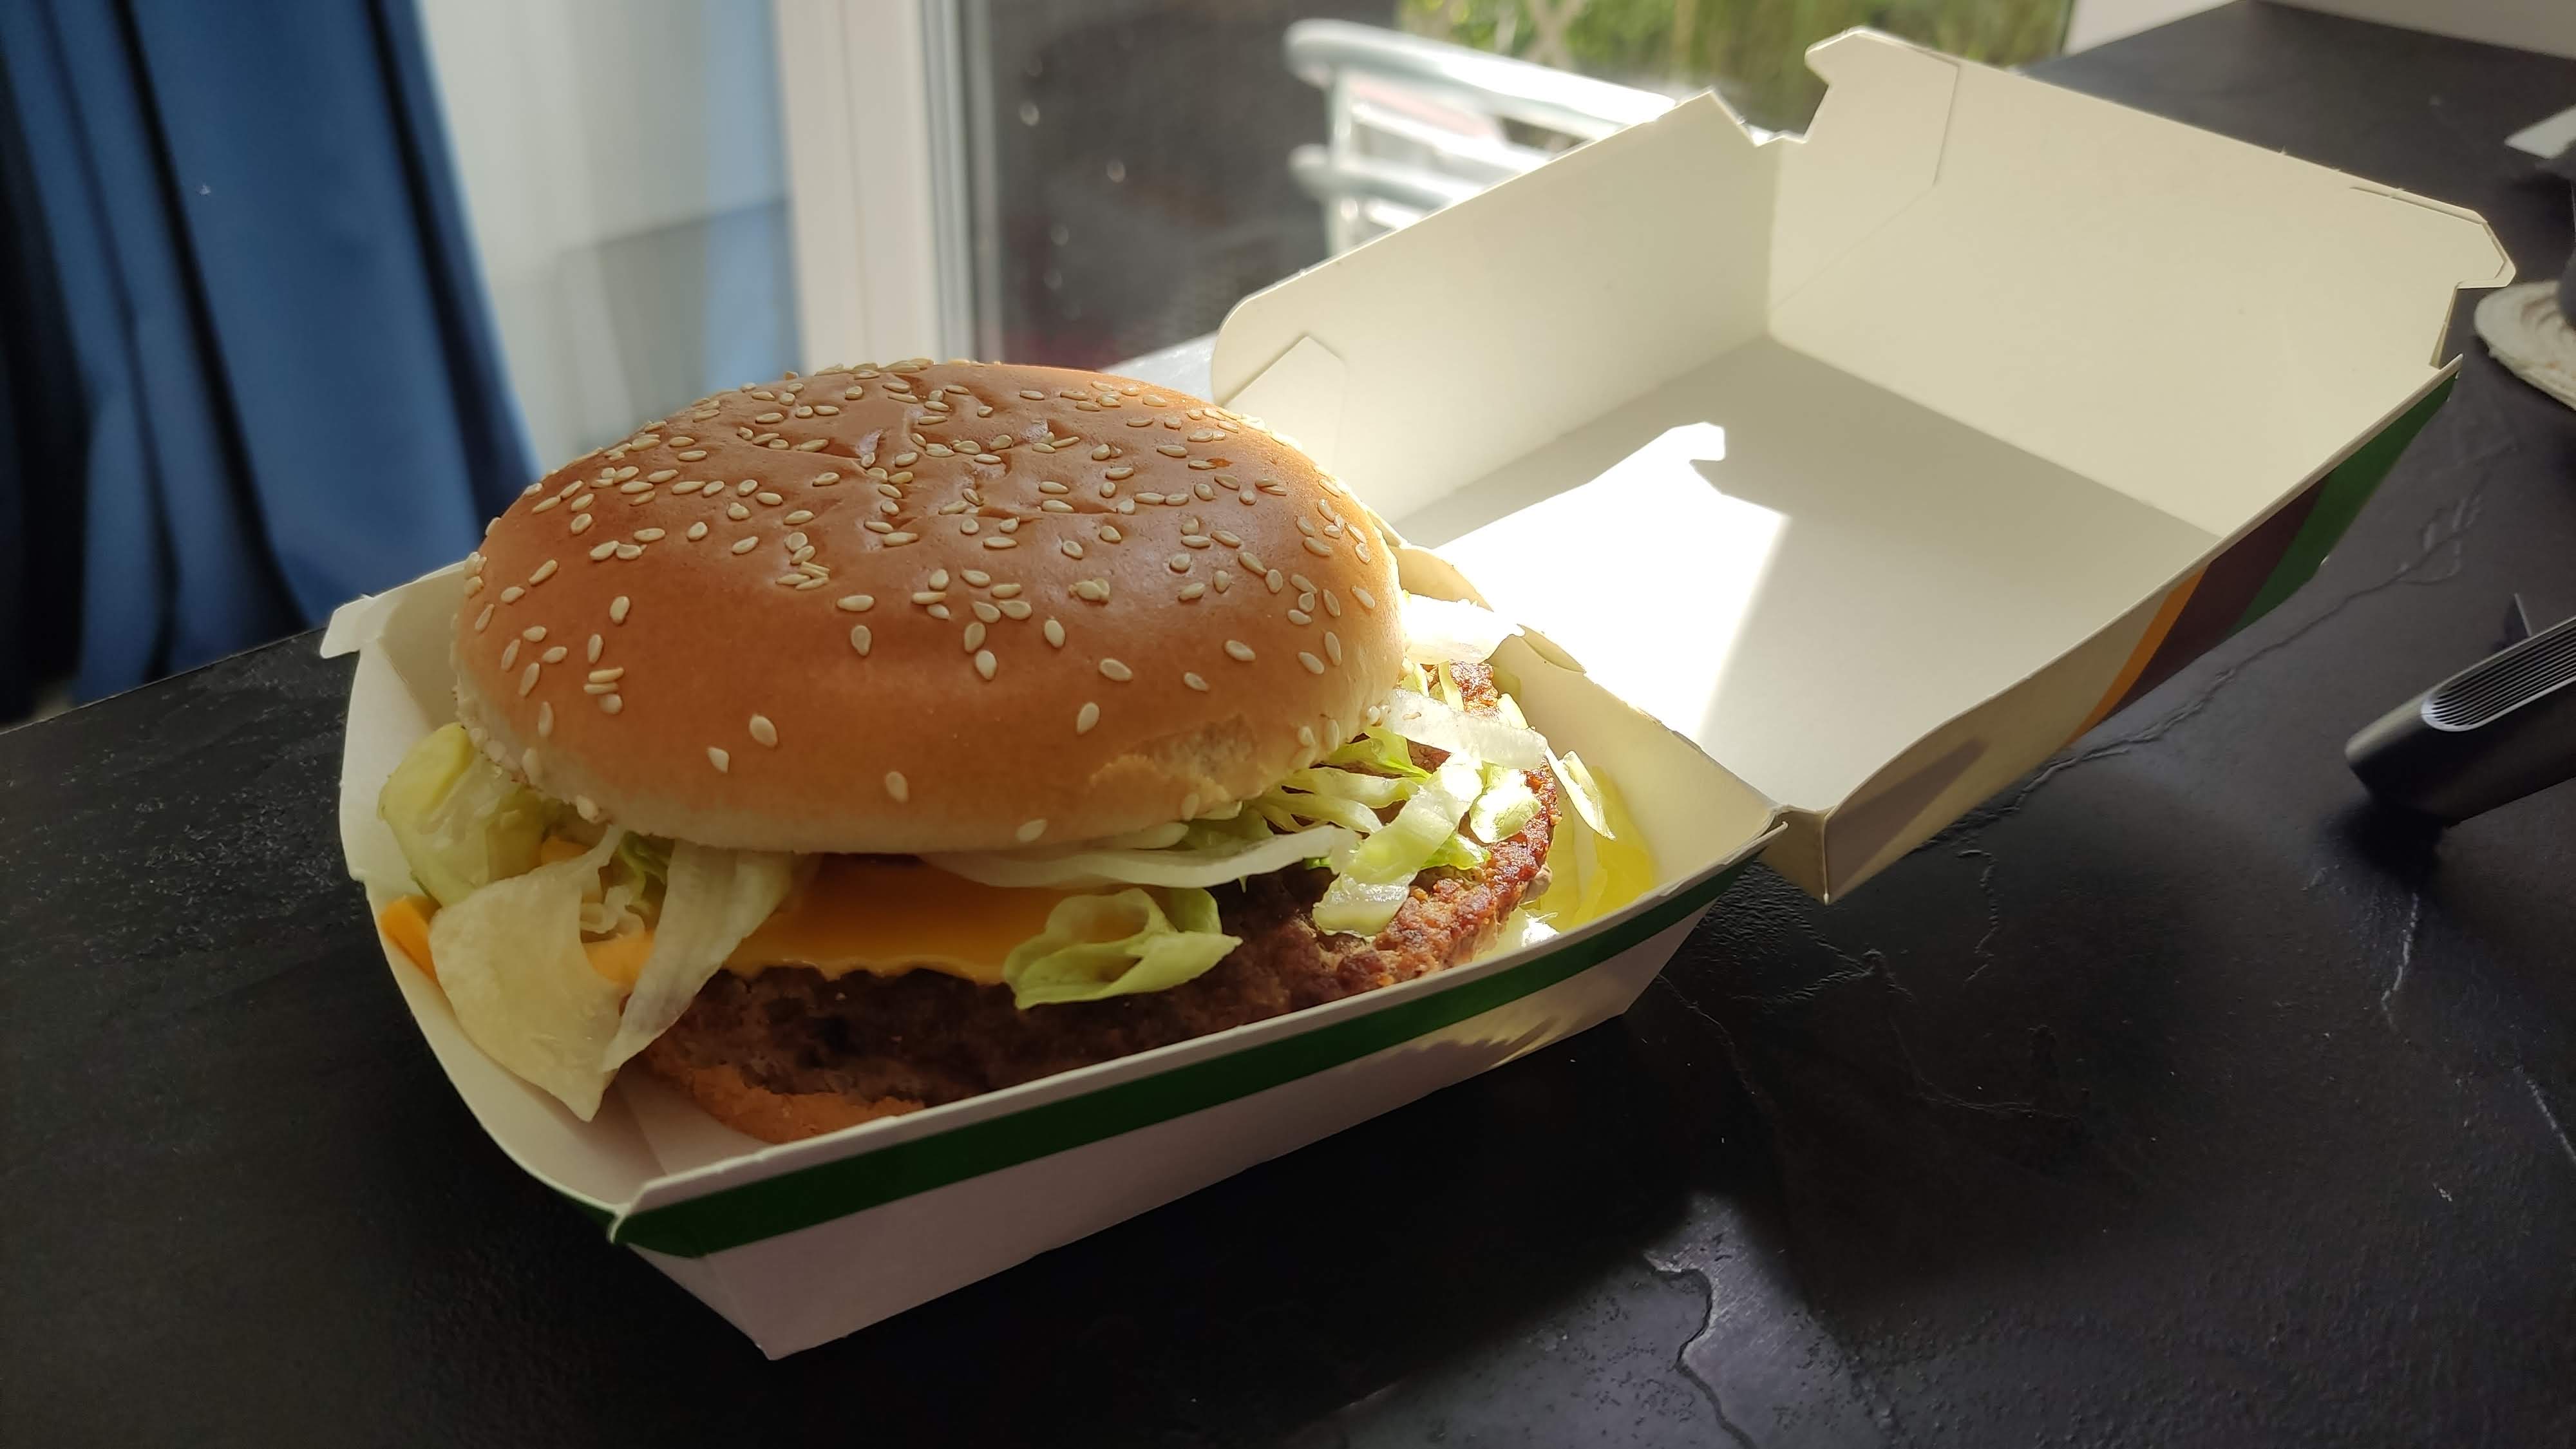 The WieśMac (VillageMac): A Taste of Tradition in Poland's McDonald's : Freshly delivered Wieś Mac in its open signature box